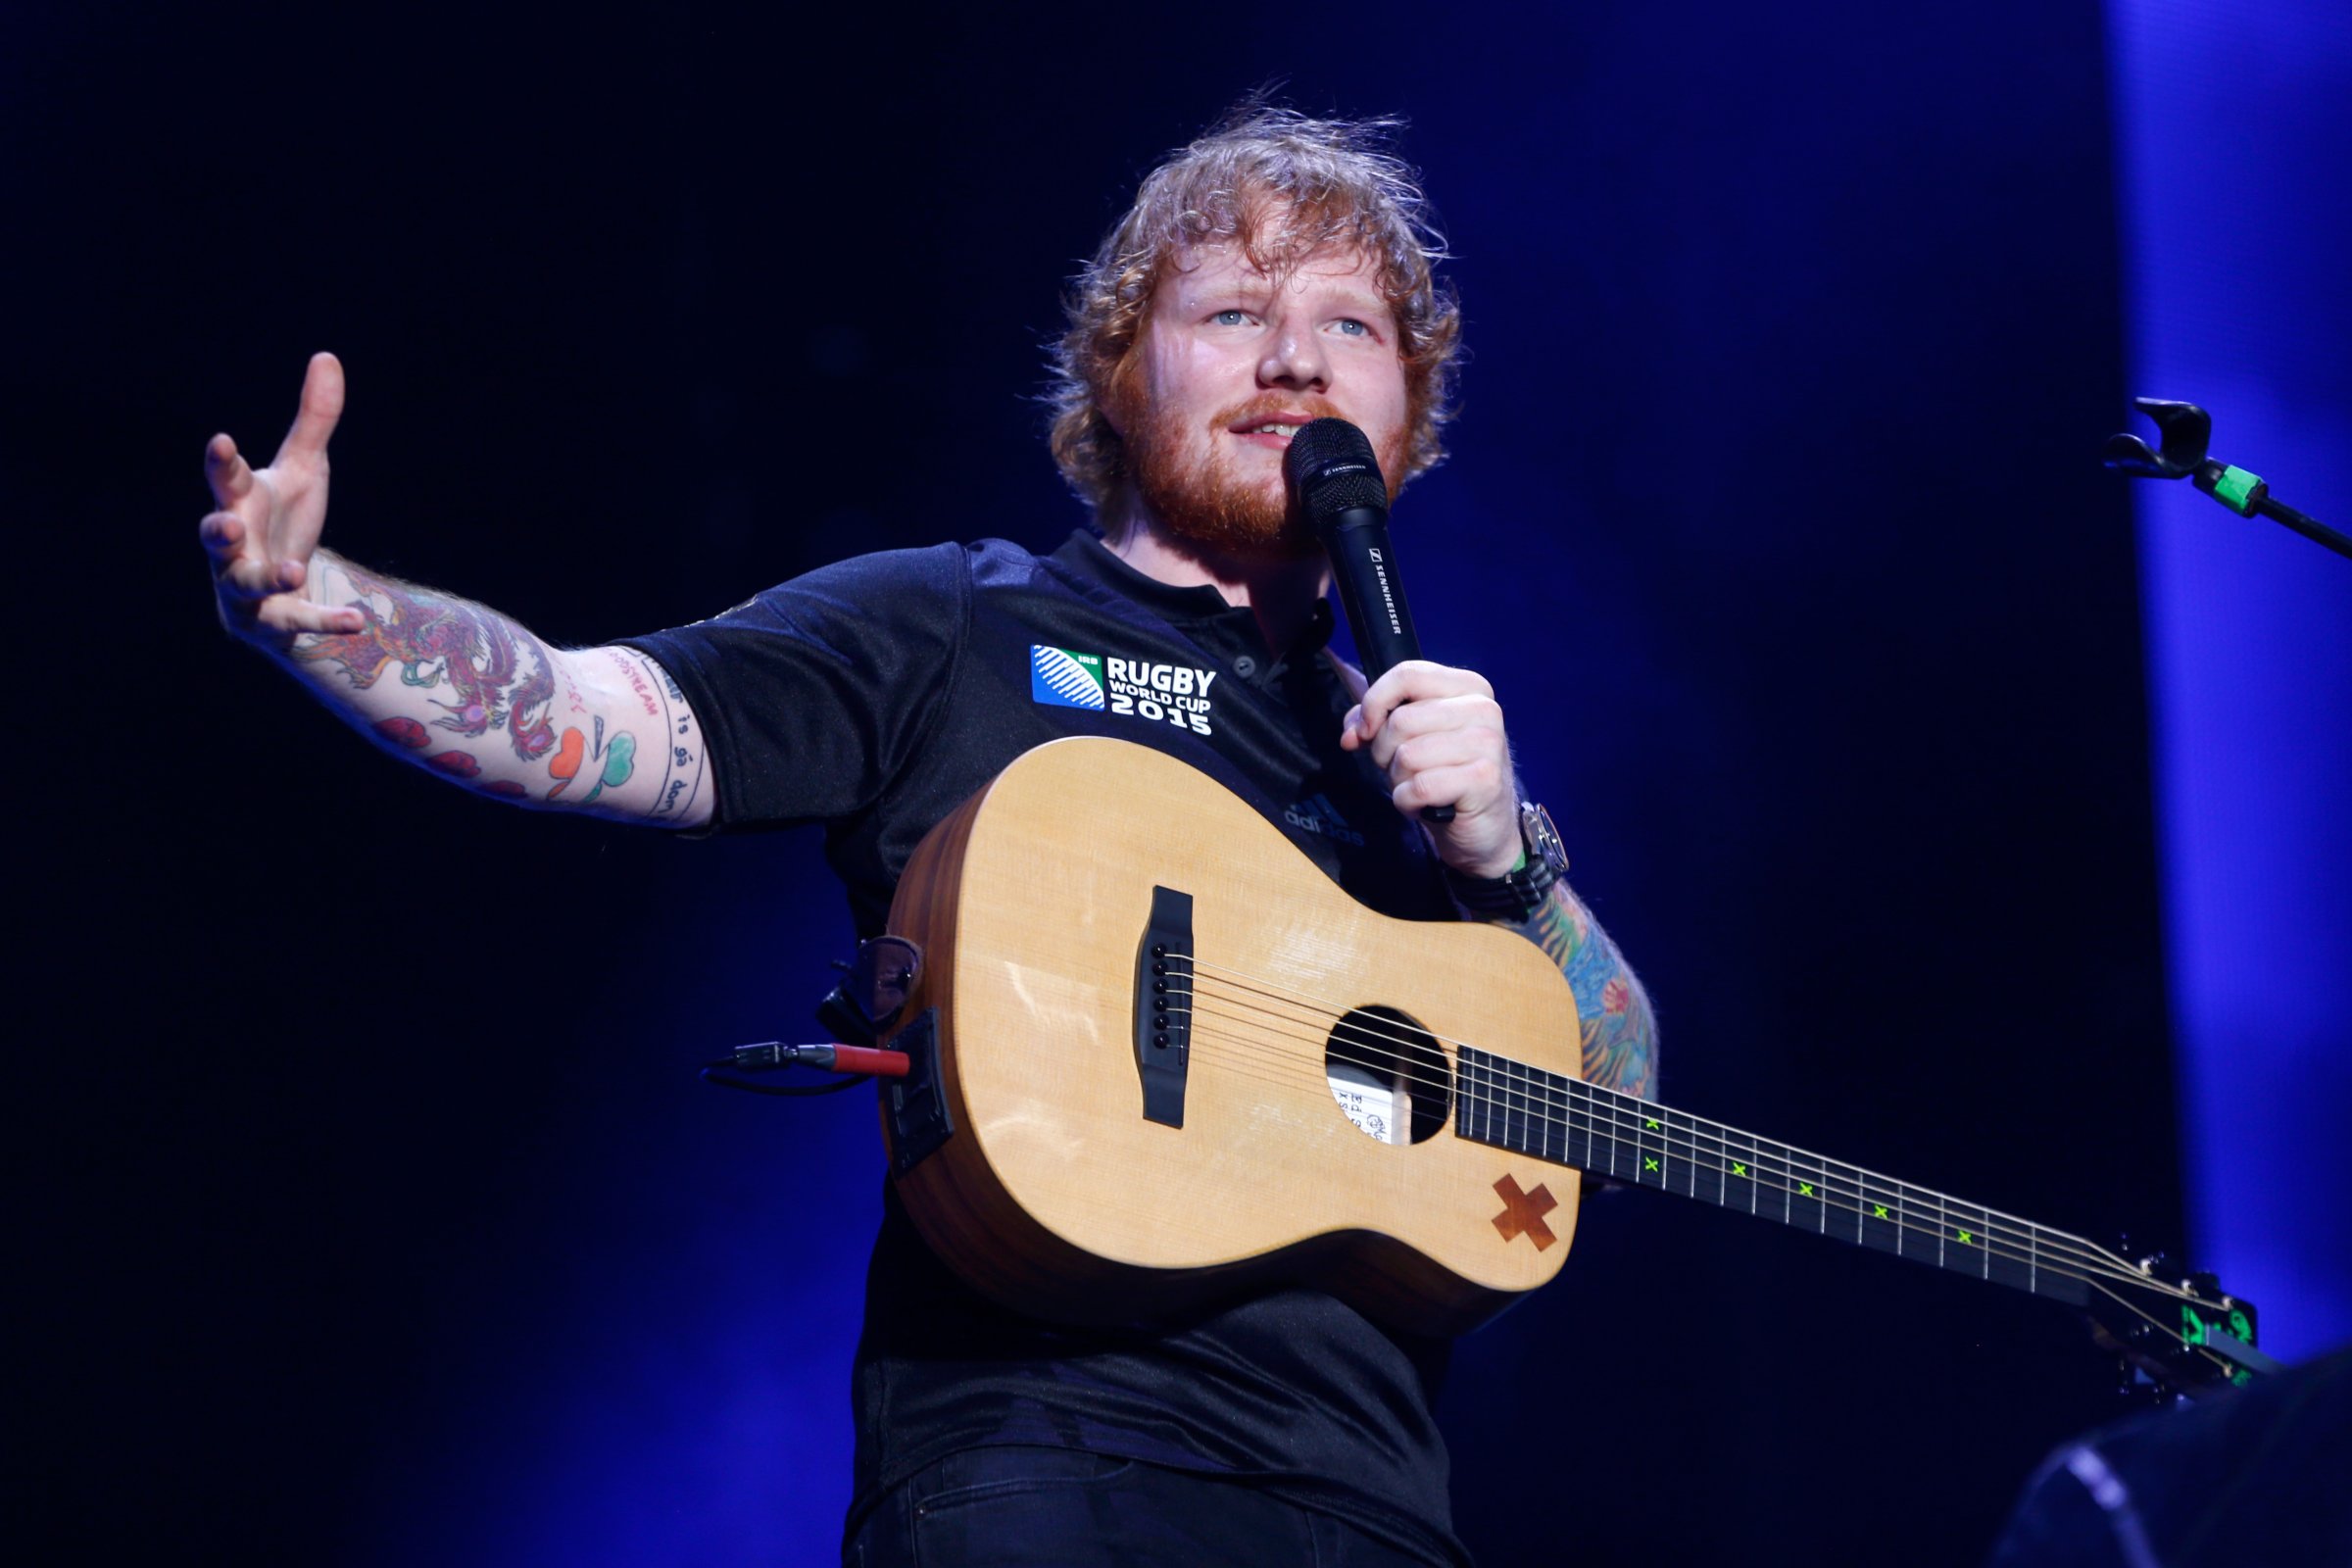 Ed Sheeran performs at Mt Smart Stadium on December 12, 2015 in Auckland, New Zealand.